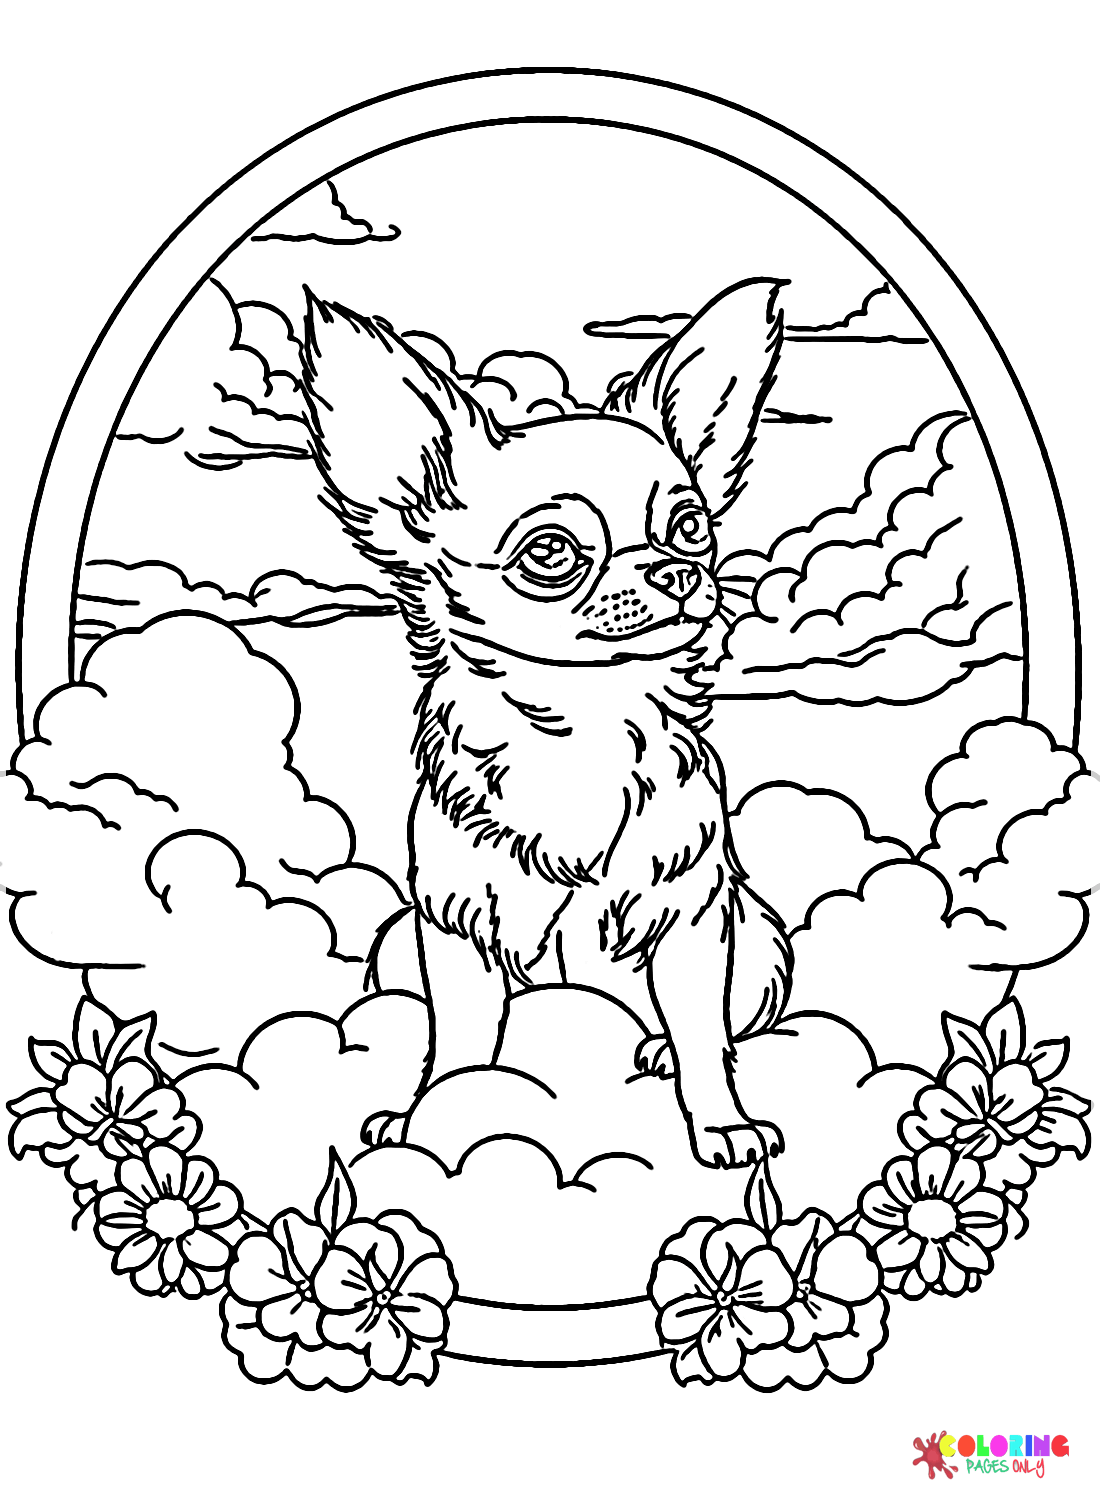 Chihuahua with Flowers and Clouds Coloring Page - Free Printable ...